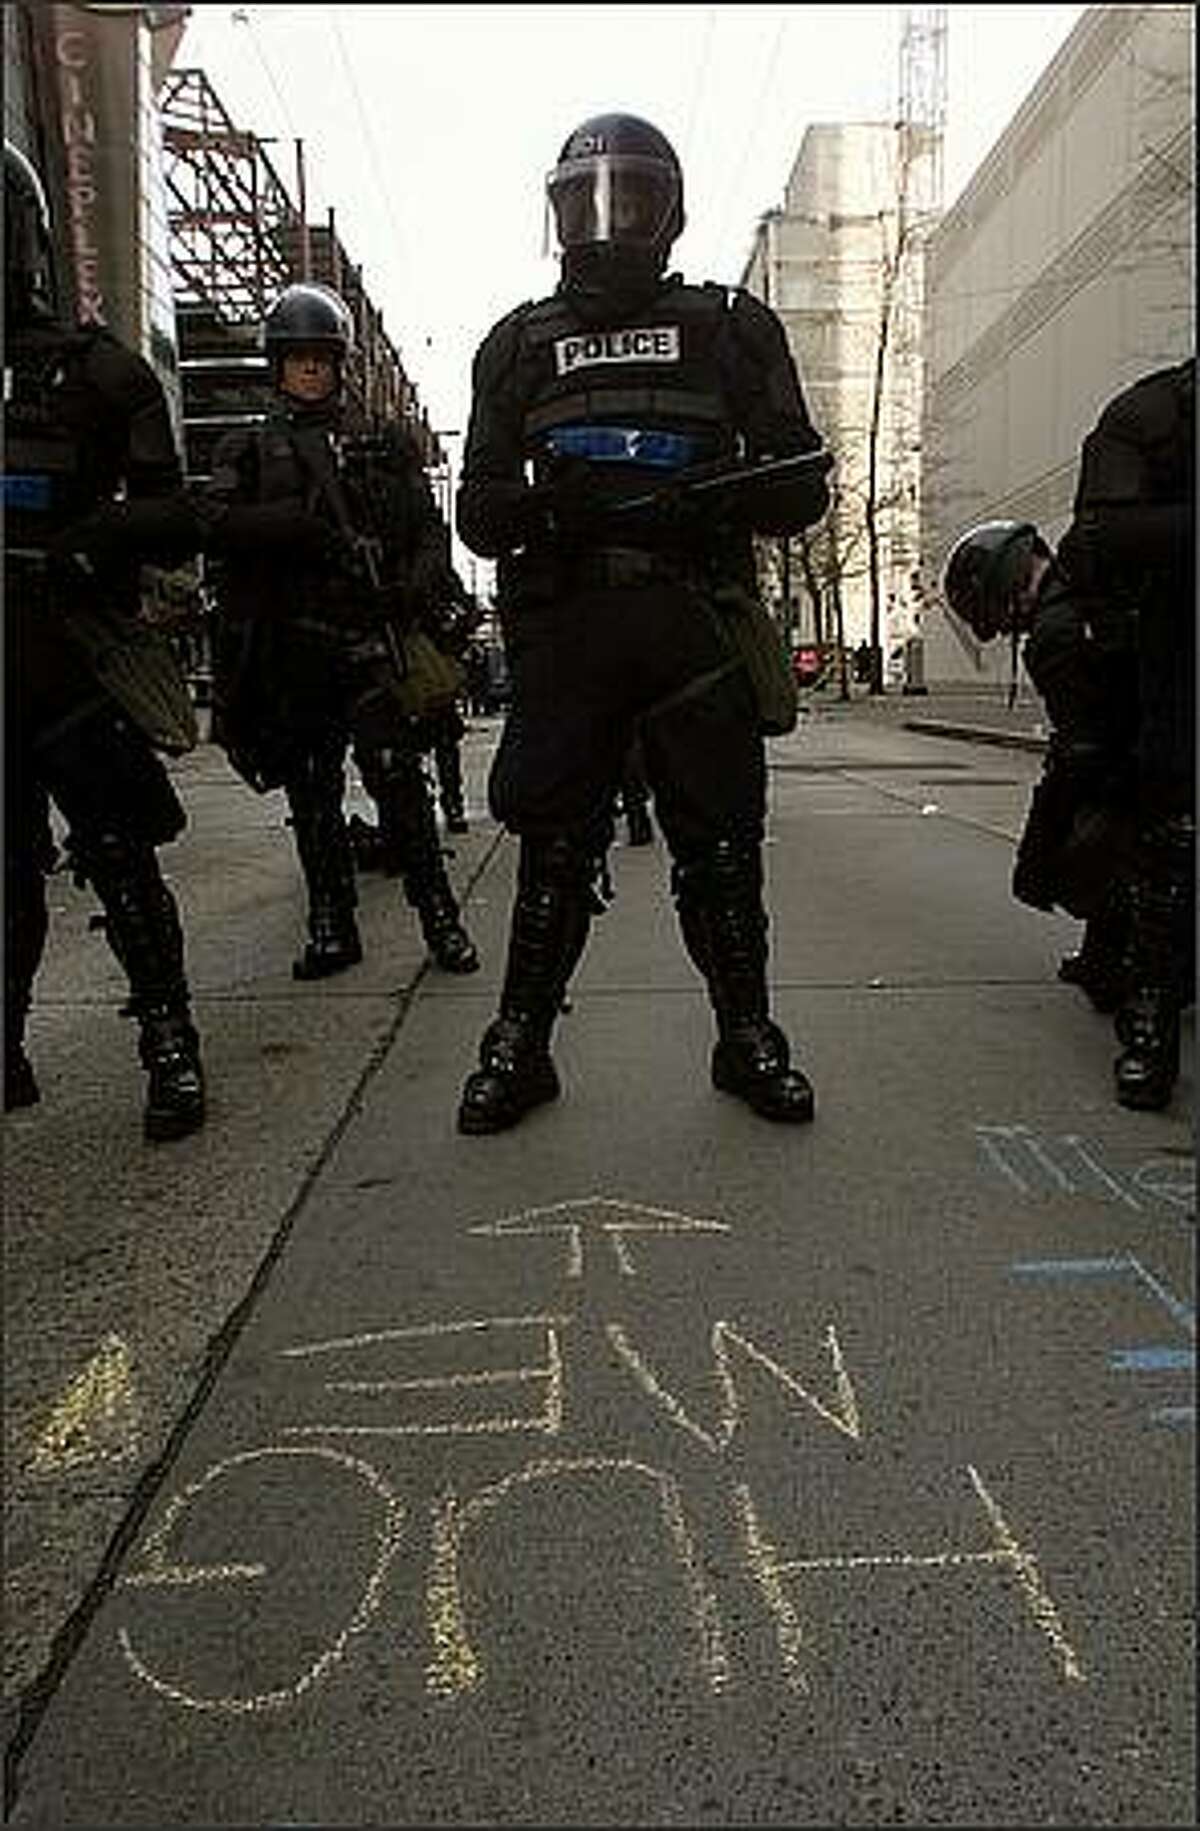 Chalk message for riot police. Photo by Mike Urban/Seattle Post-Intelligencer